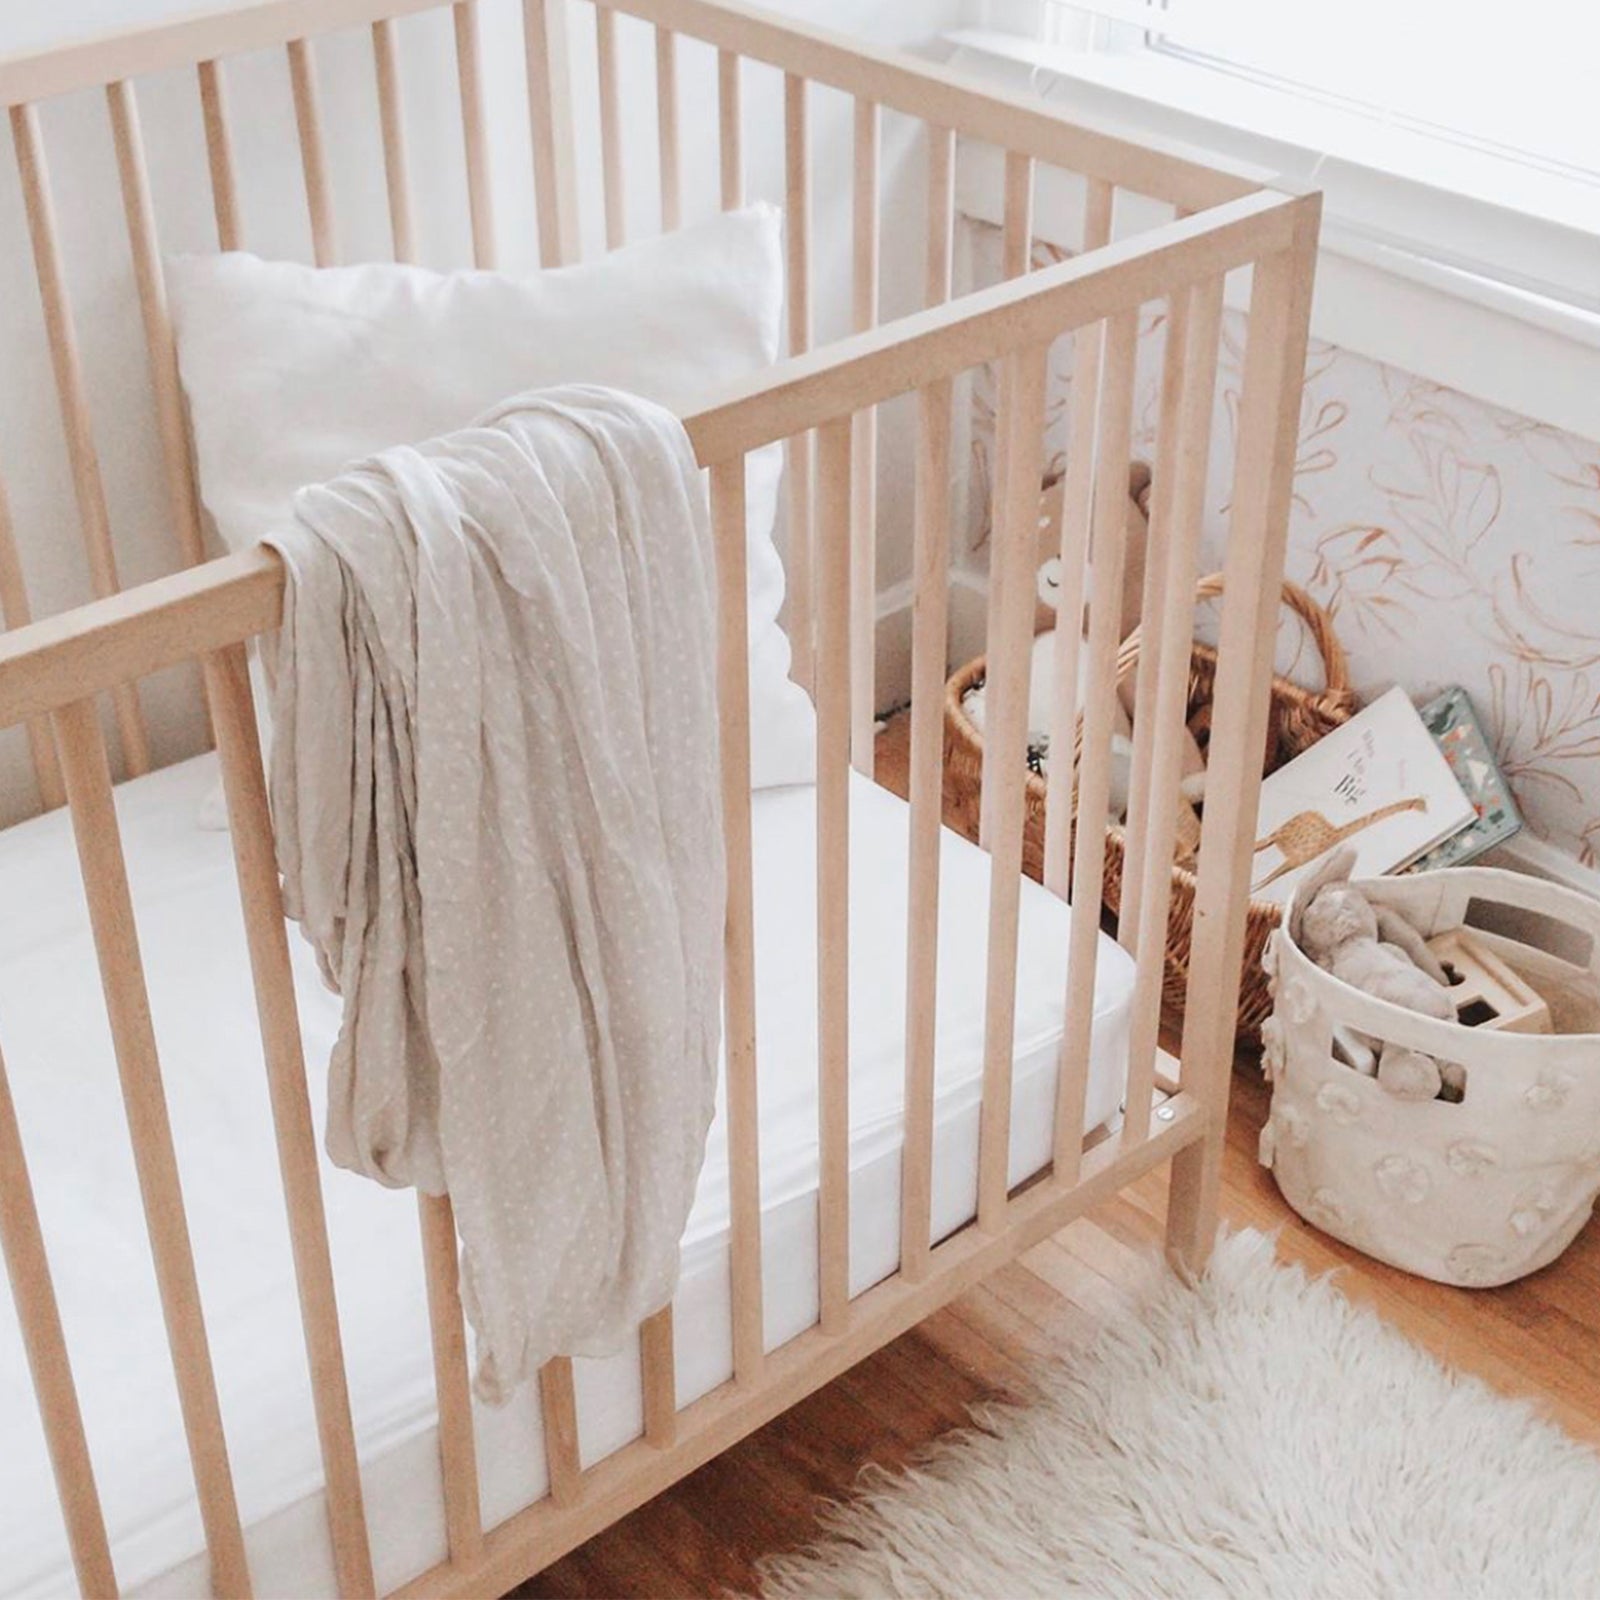 bamboo crib sheets draped over wooden crib White, Oat, Driftwood, Charcoal, Light Grey, Navy, Olive, Sage, Harbor Mist